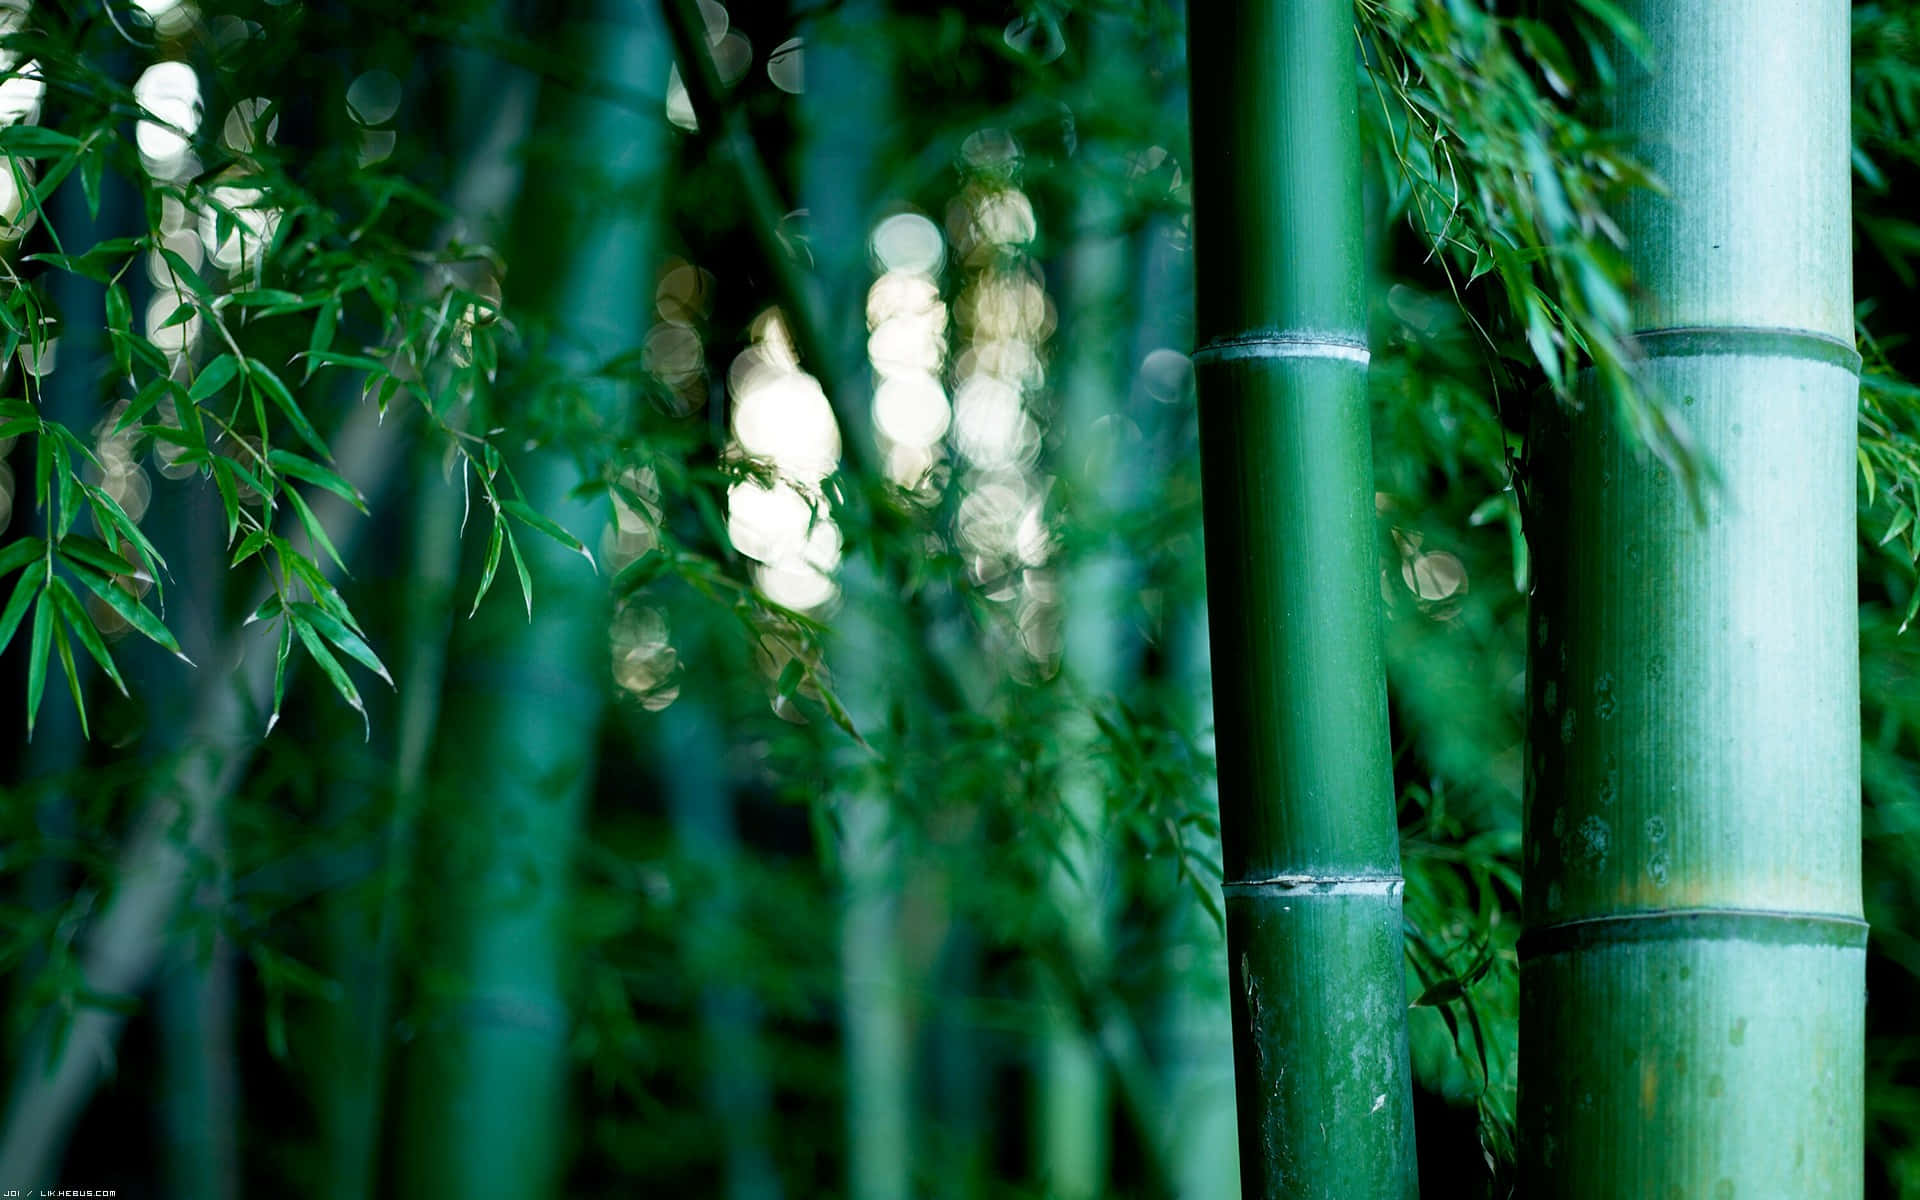 “nature’s Majesty: Take In The Calm And Serenity Of A Bamboo Forest” Background